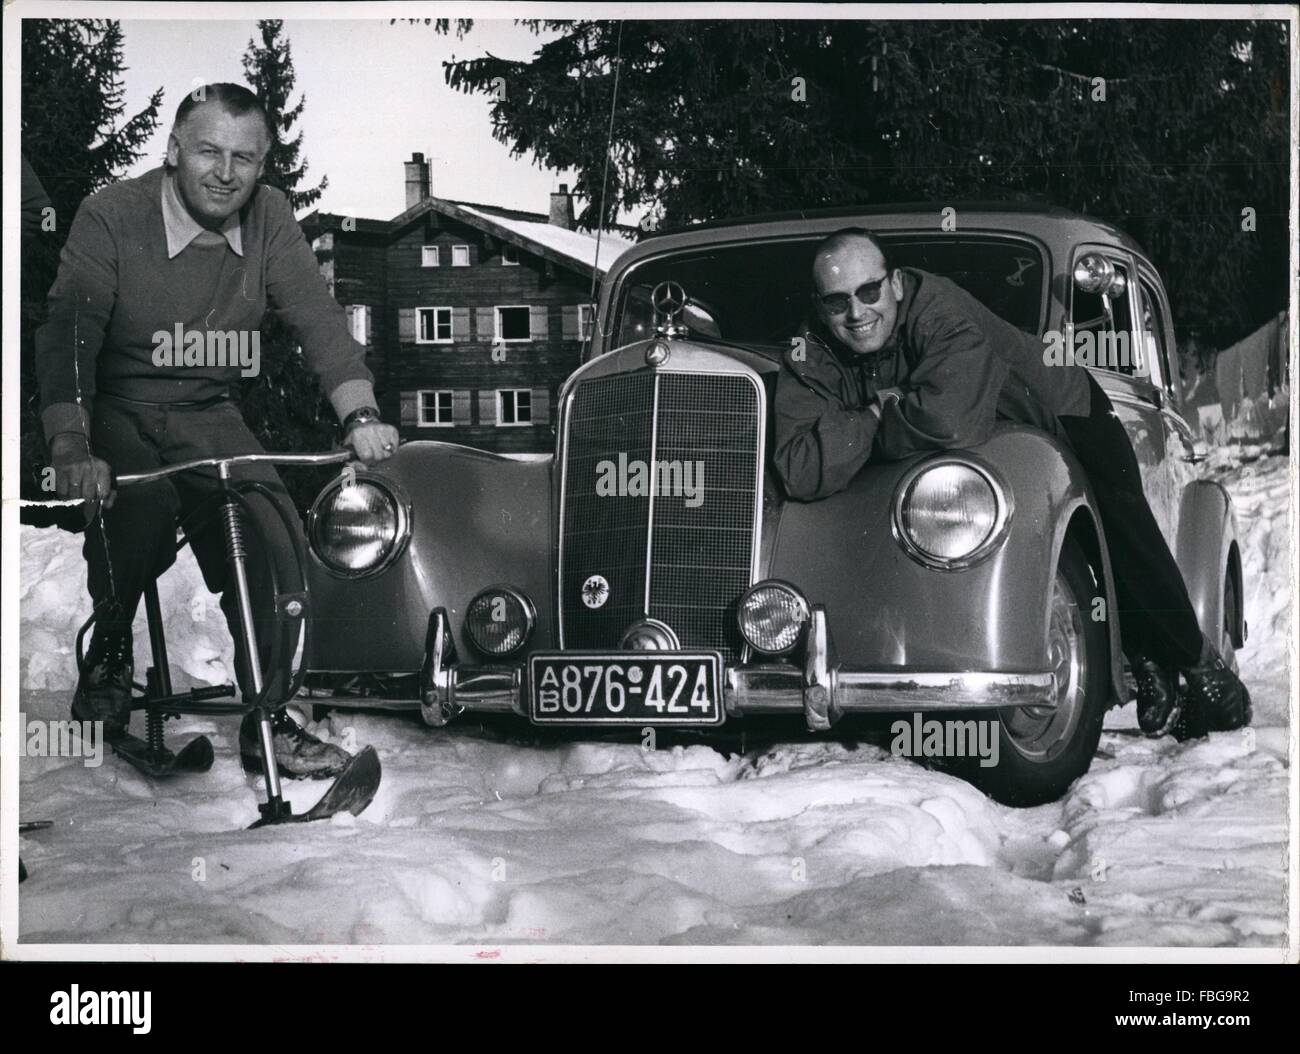 1962 - Karl Kling, Germany's sportsman Nr. 1. and Mercedes champion in Mexiko during his holidays in the Algau/South-West Germany. Karl Kling, this time on the steering wheel of a Skibob, and his companion in the most difficult motor - car race of the world in Mexiko, Klenk enjoy themselves after exerting racing - days in front of the Algau Berghof near Sonthofen/Algau. They like snow and sun in 1500 meters above sea - level. © Keystone Pictures USA/ZUMAPRESS.com/Alamy Live News Stock Photo